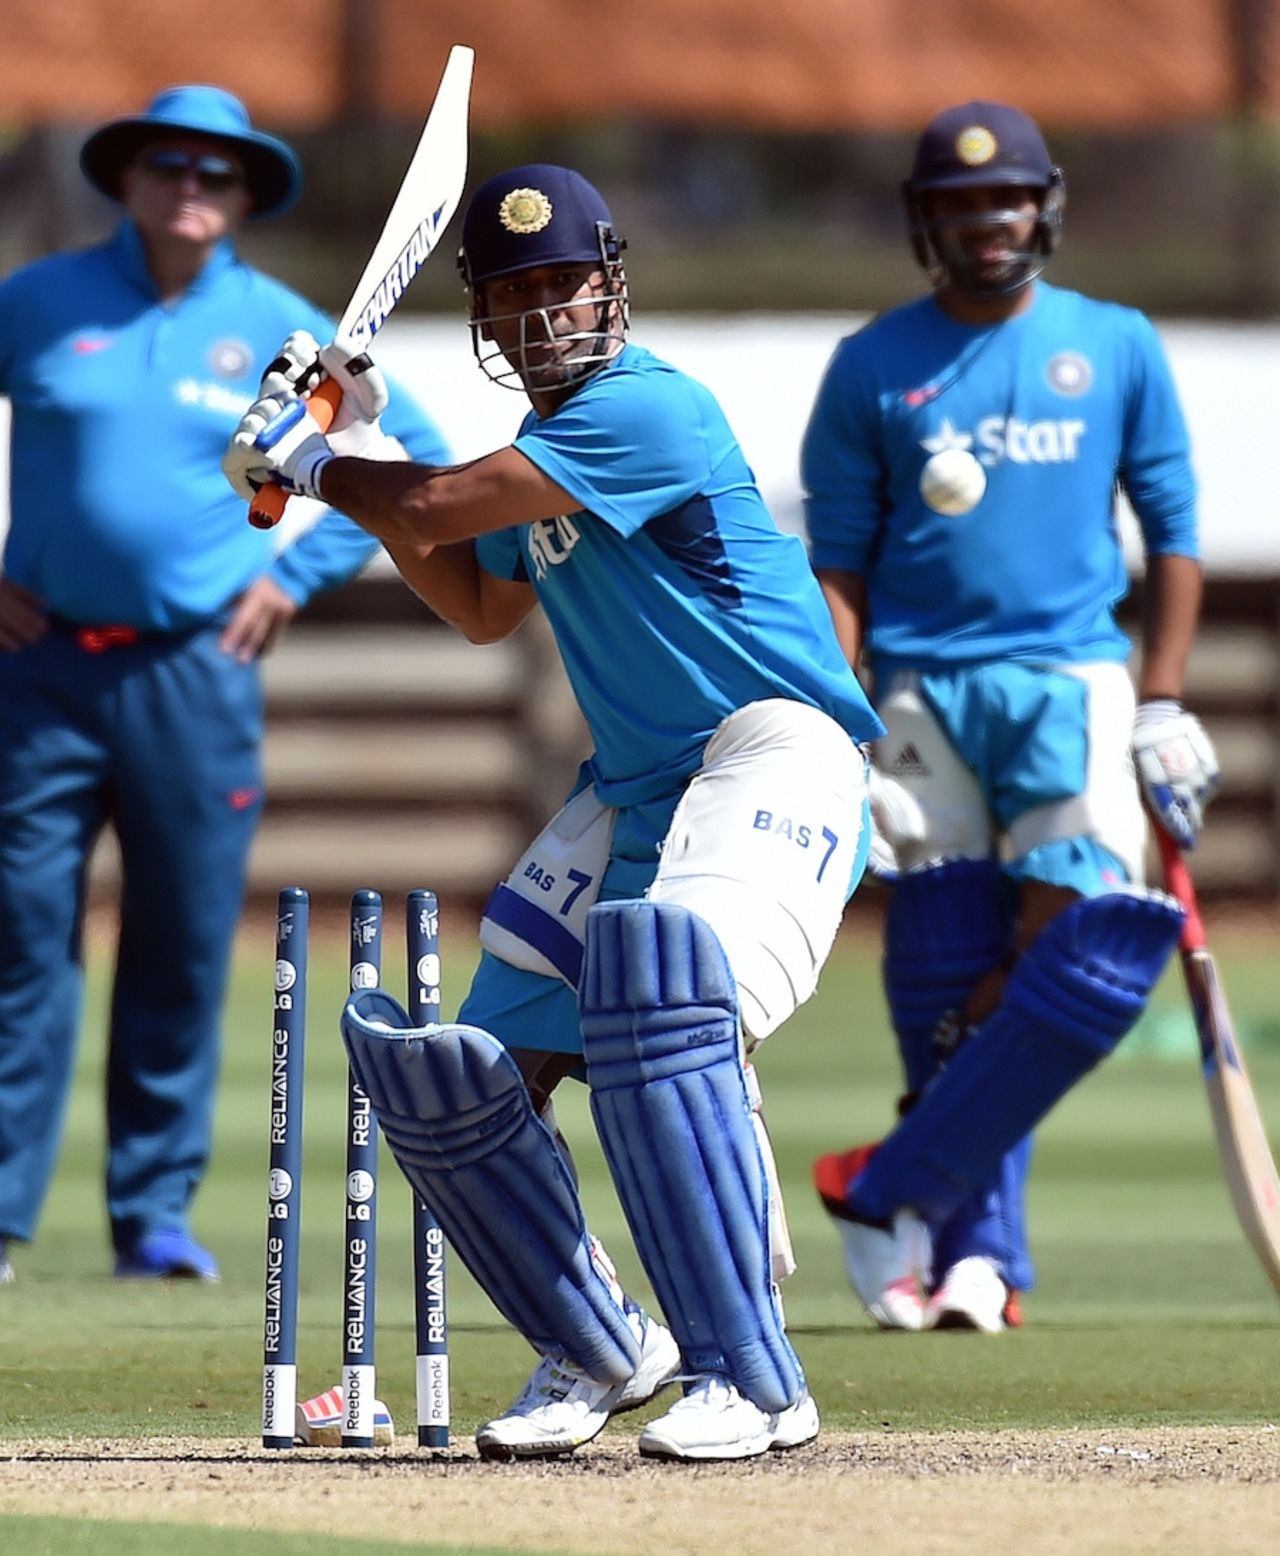 MS Dhoni prepares to smite the ball, World Cup, Melbourne, February 20, 2015